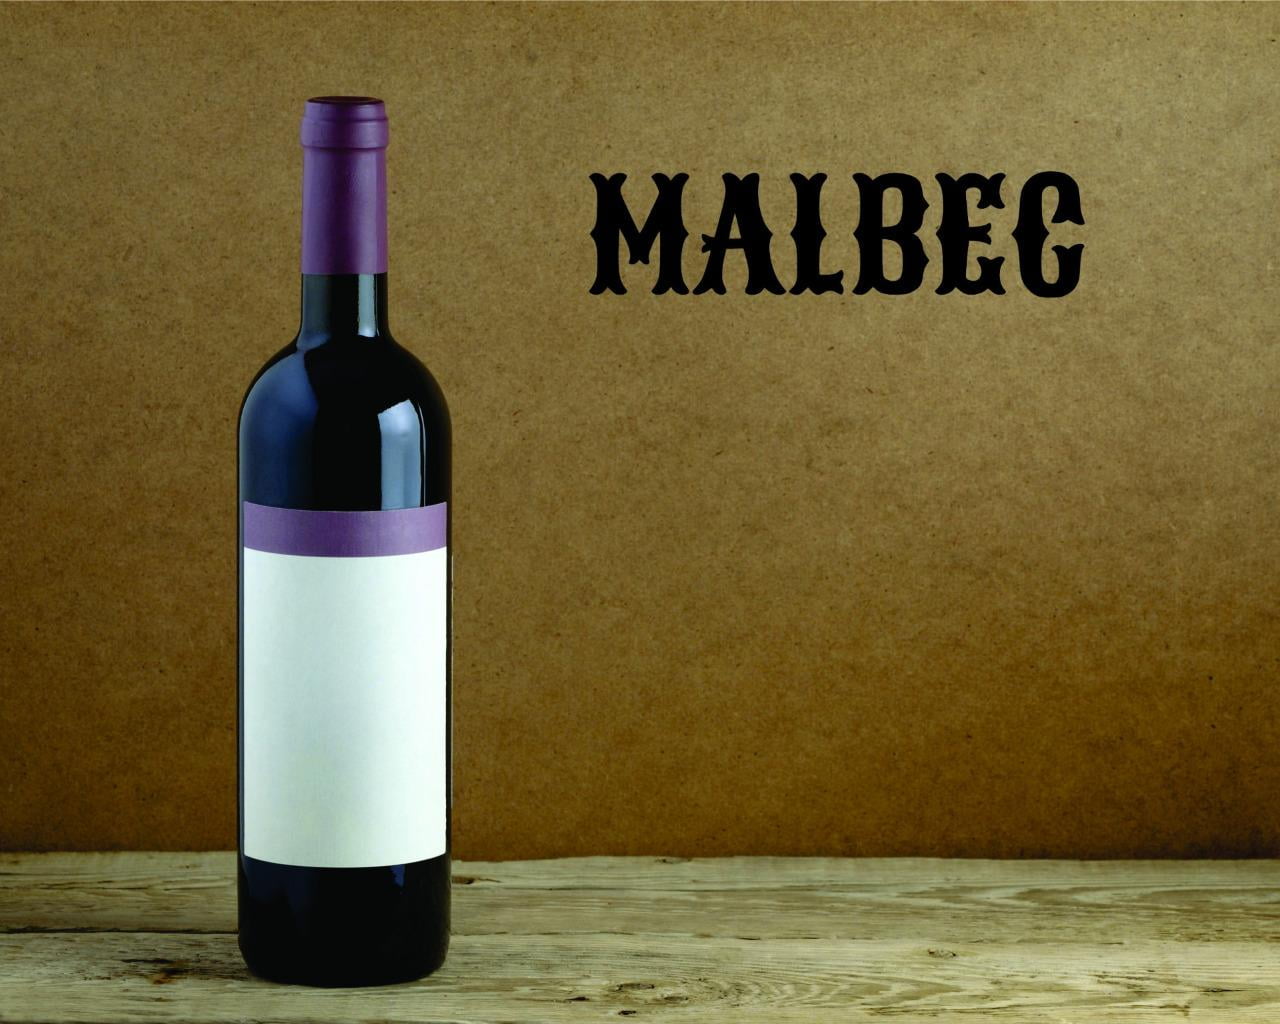 Malbec Kitchen Quote Color Peel & Stick Wall Sticker Black Size 8 Inches x 32 Inches Design with Vinyl Moti 2598 2 Decal 